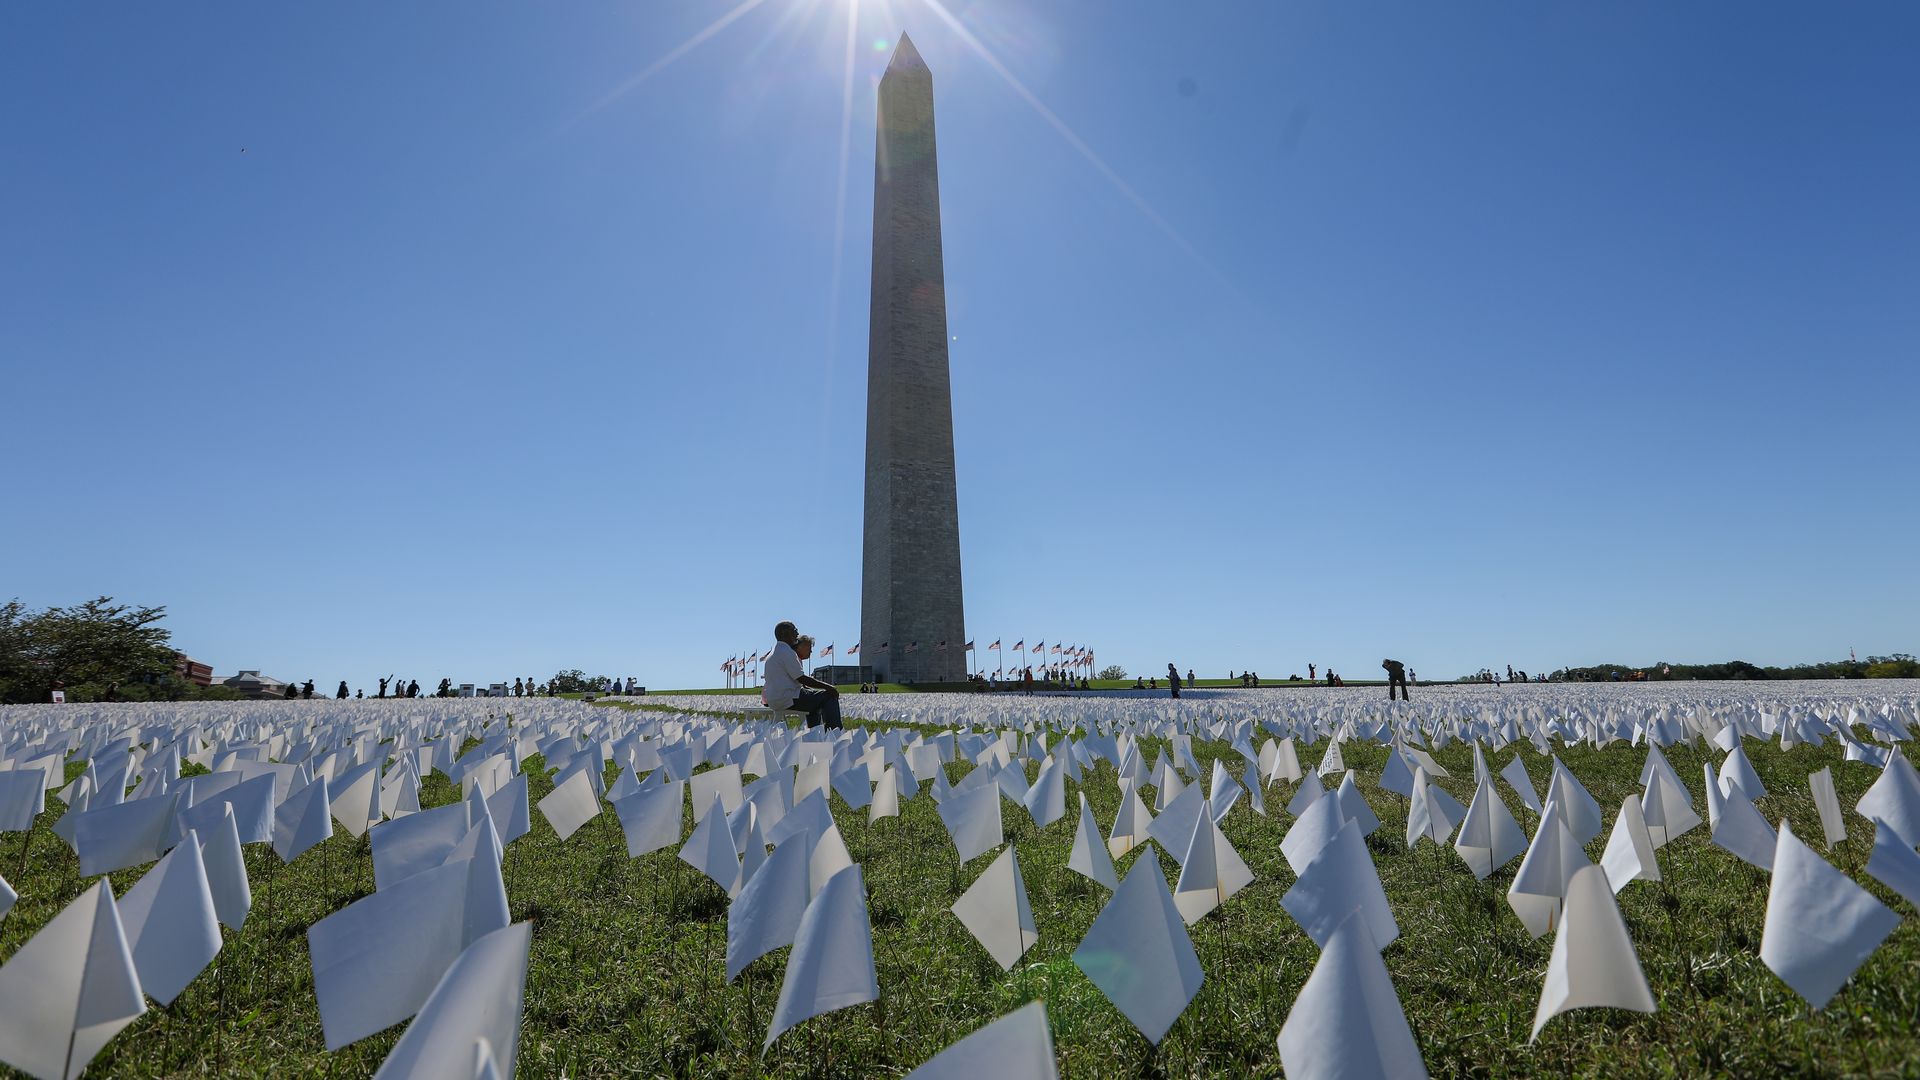 A row of white flags in the grass outside the Washington Monument